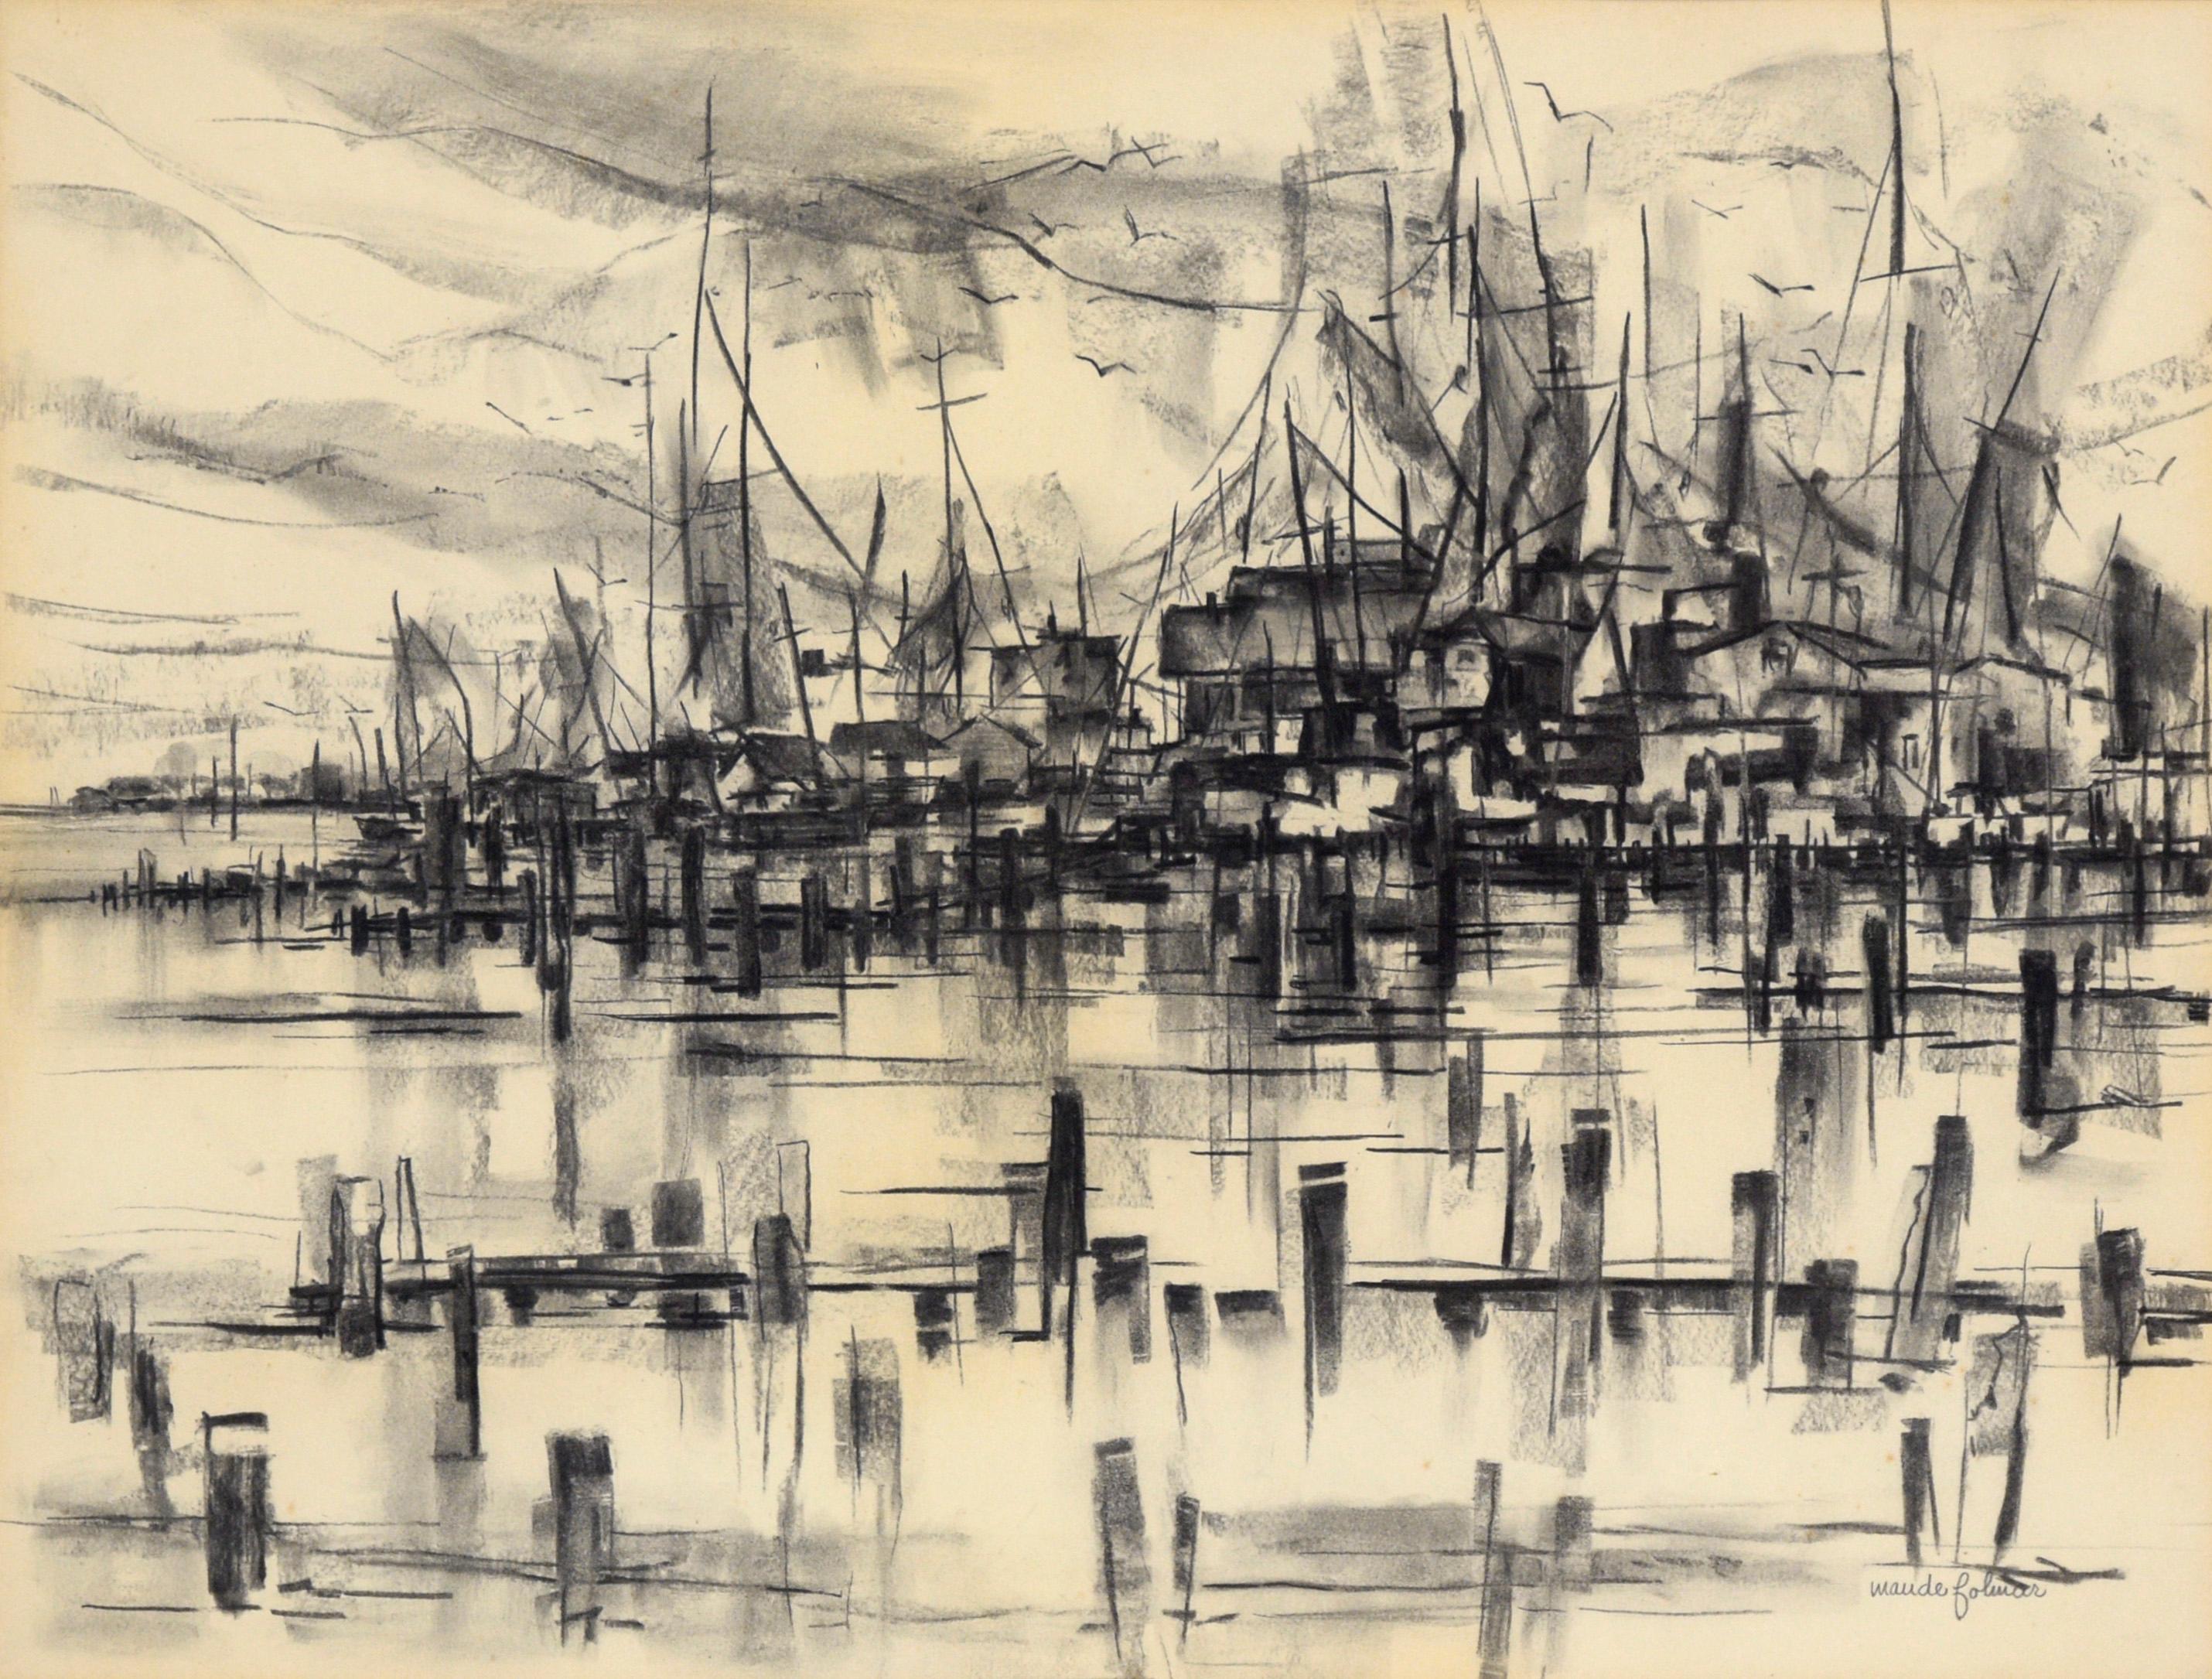 Ships at the Harbor - Nautical Seascape with Seagulls in Charcoal on Paper - Art by Maude Folmar Ramsey